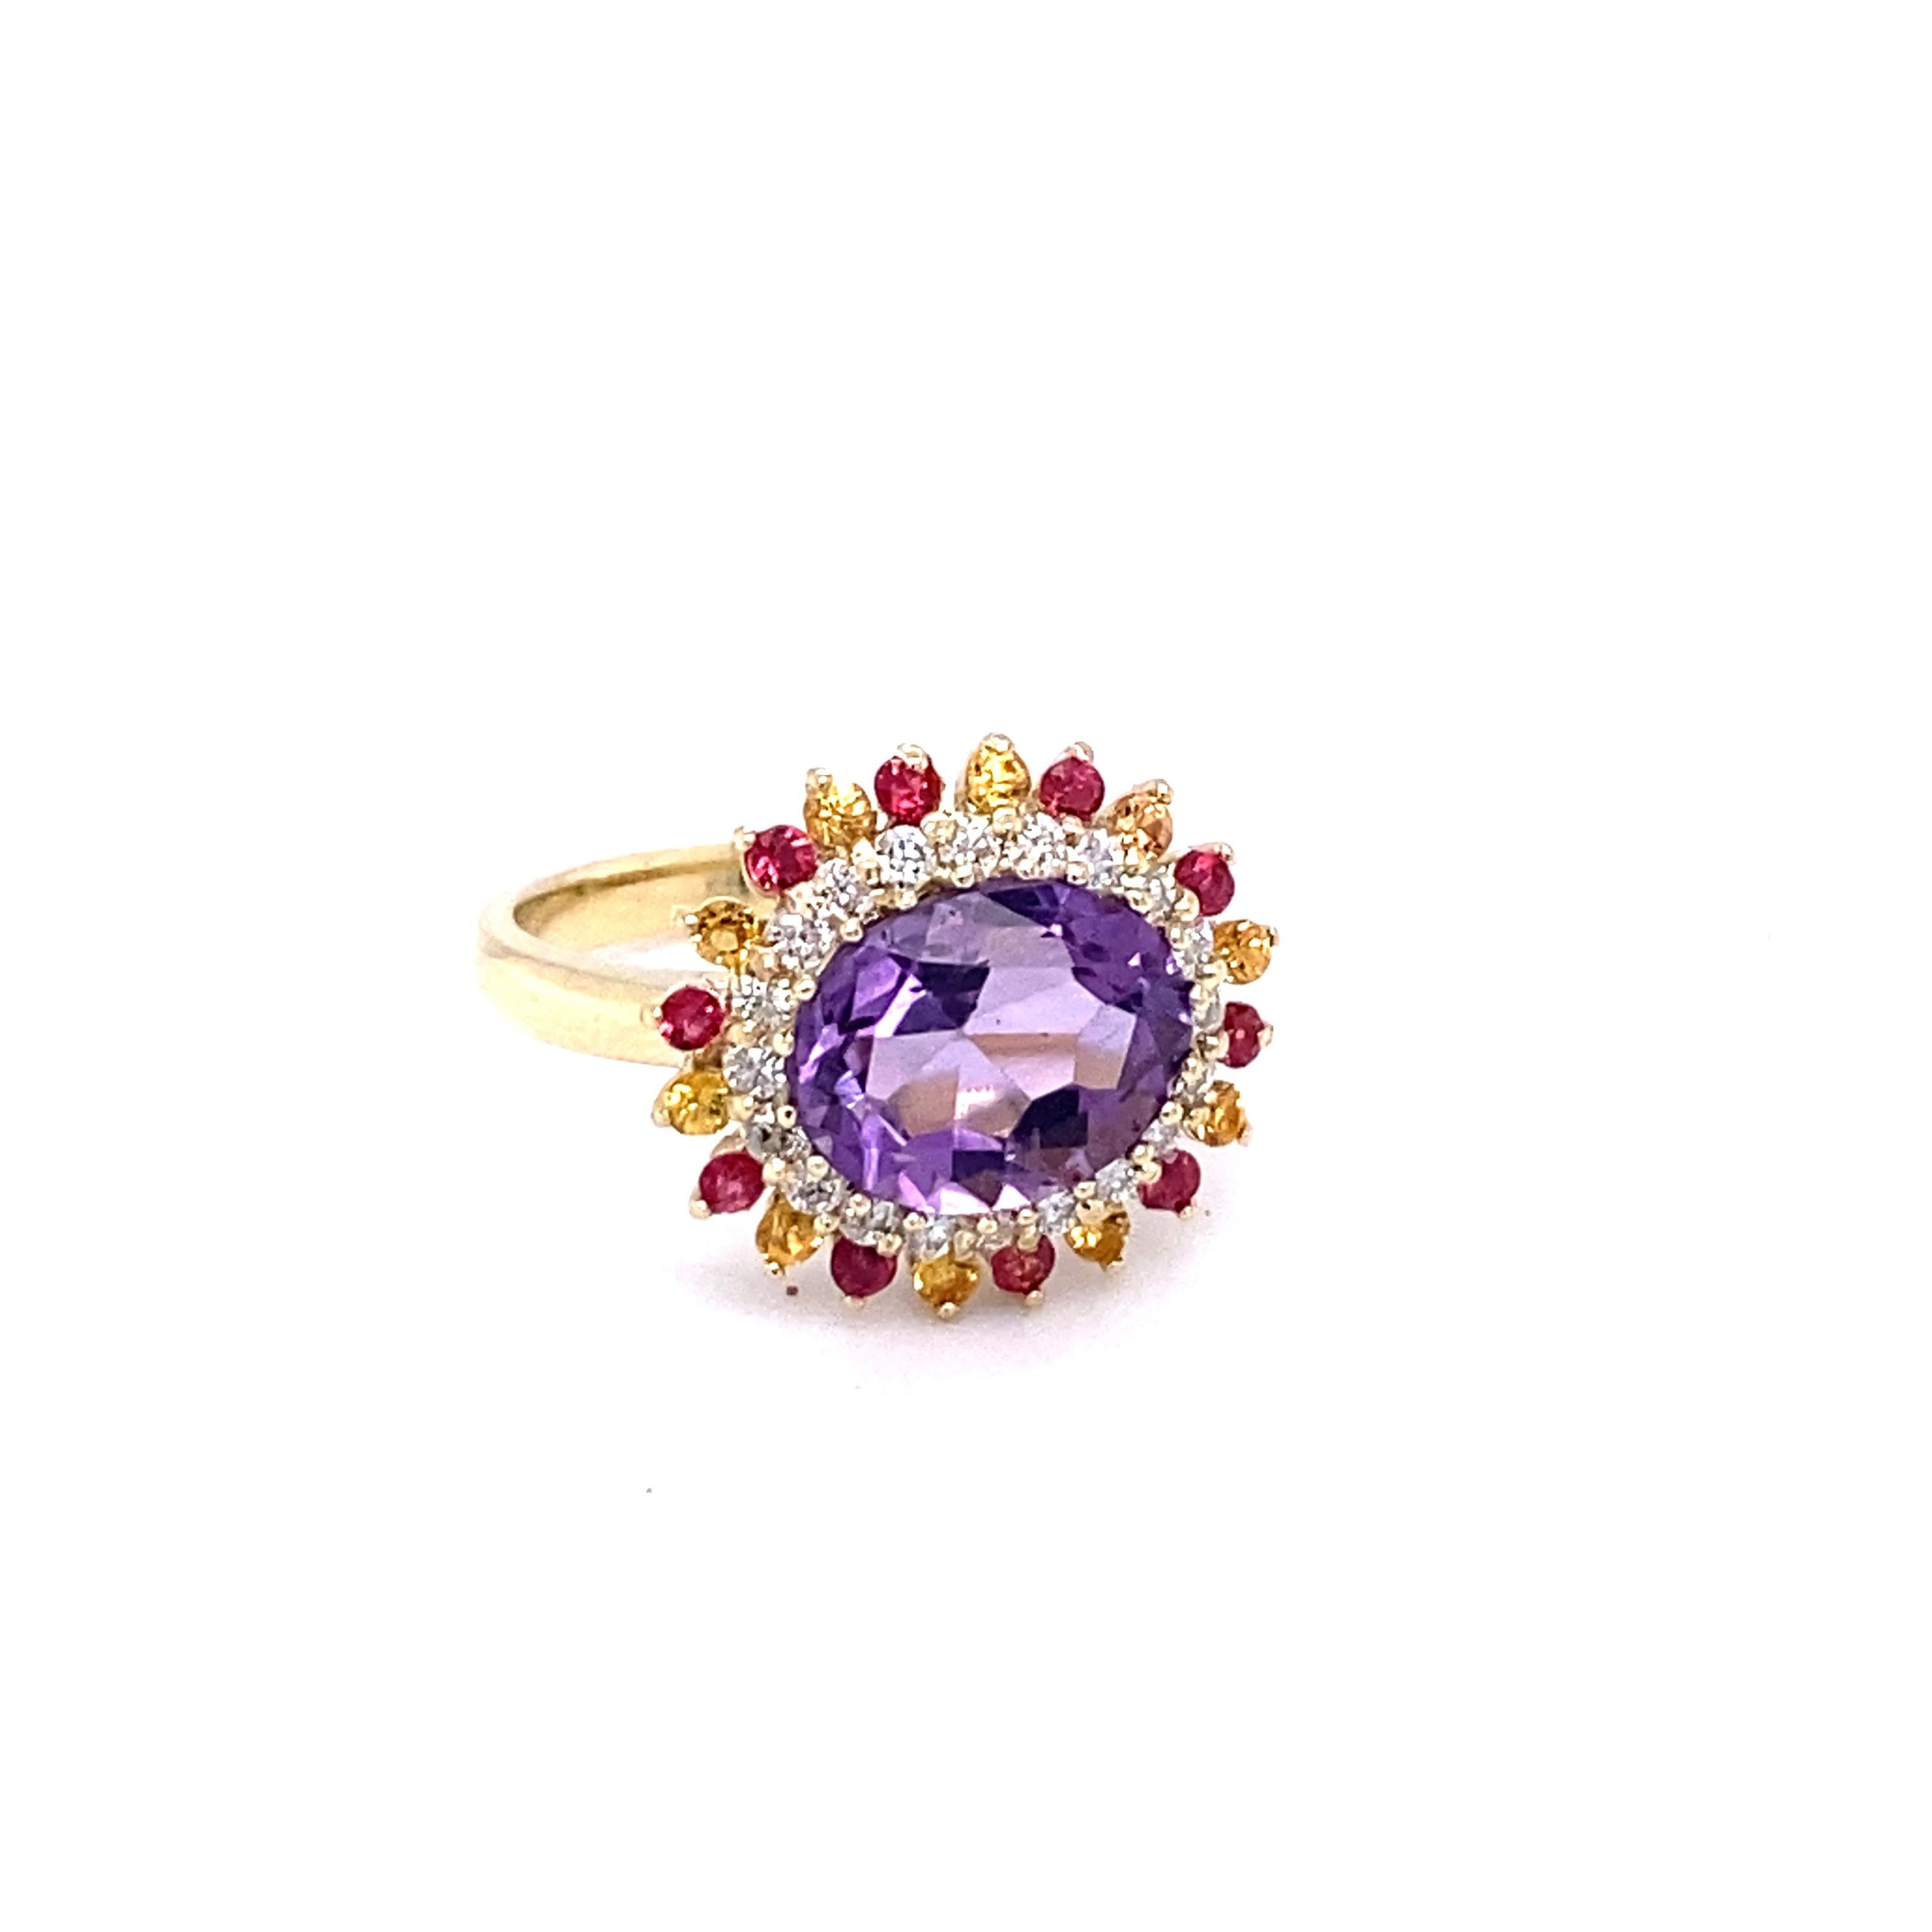 3.37 Carat Natural Amethyst Diamond Sapphire Yellow Gold Cocktail Ring

Cute and Dainty!! This ring has a bright and vivid purple Oval Cut Amethyst that weighs 2.29 Carats and is embellished with 20 Red and Yellow Sapphires that weigh 0.51 Carats as